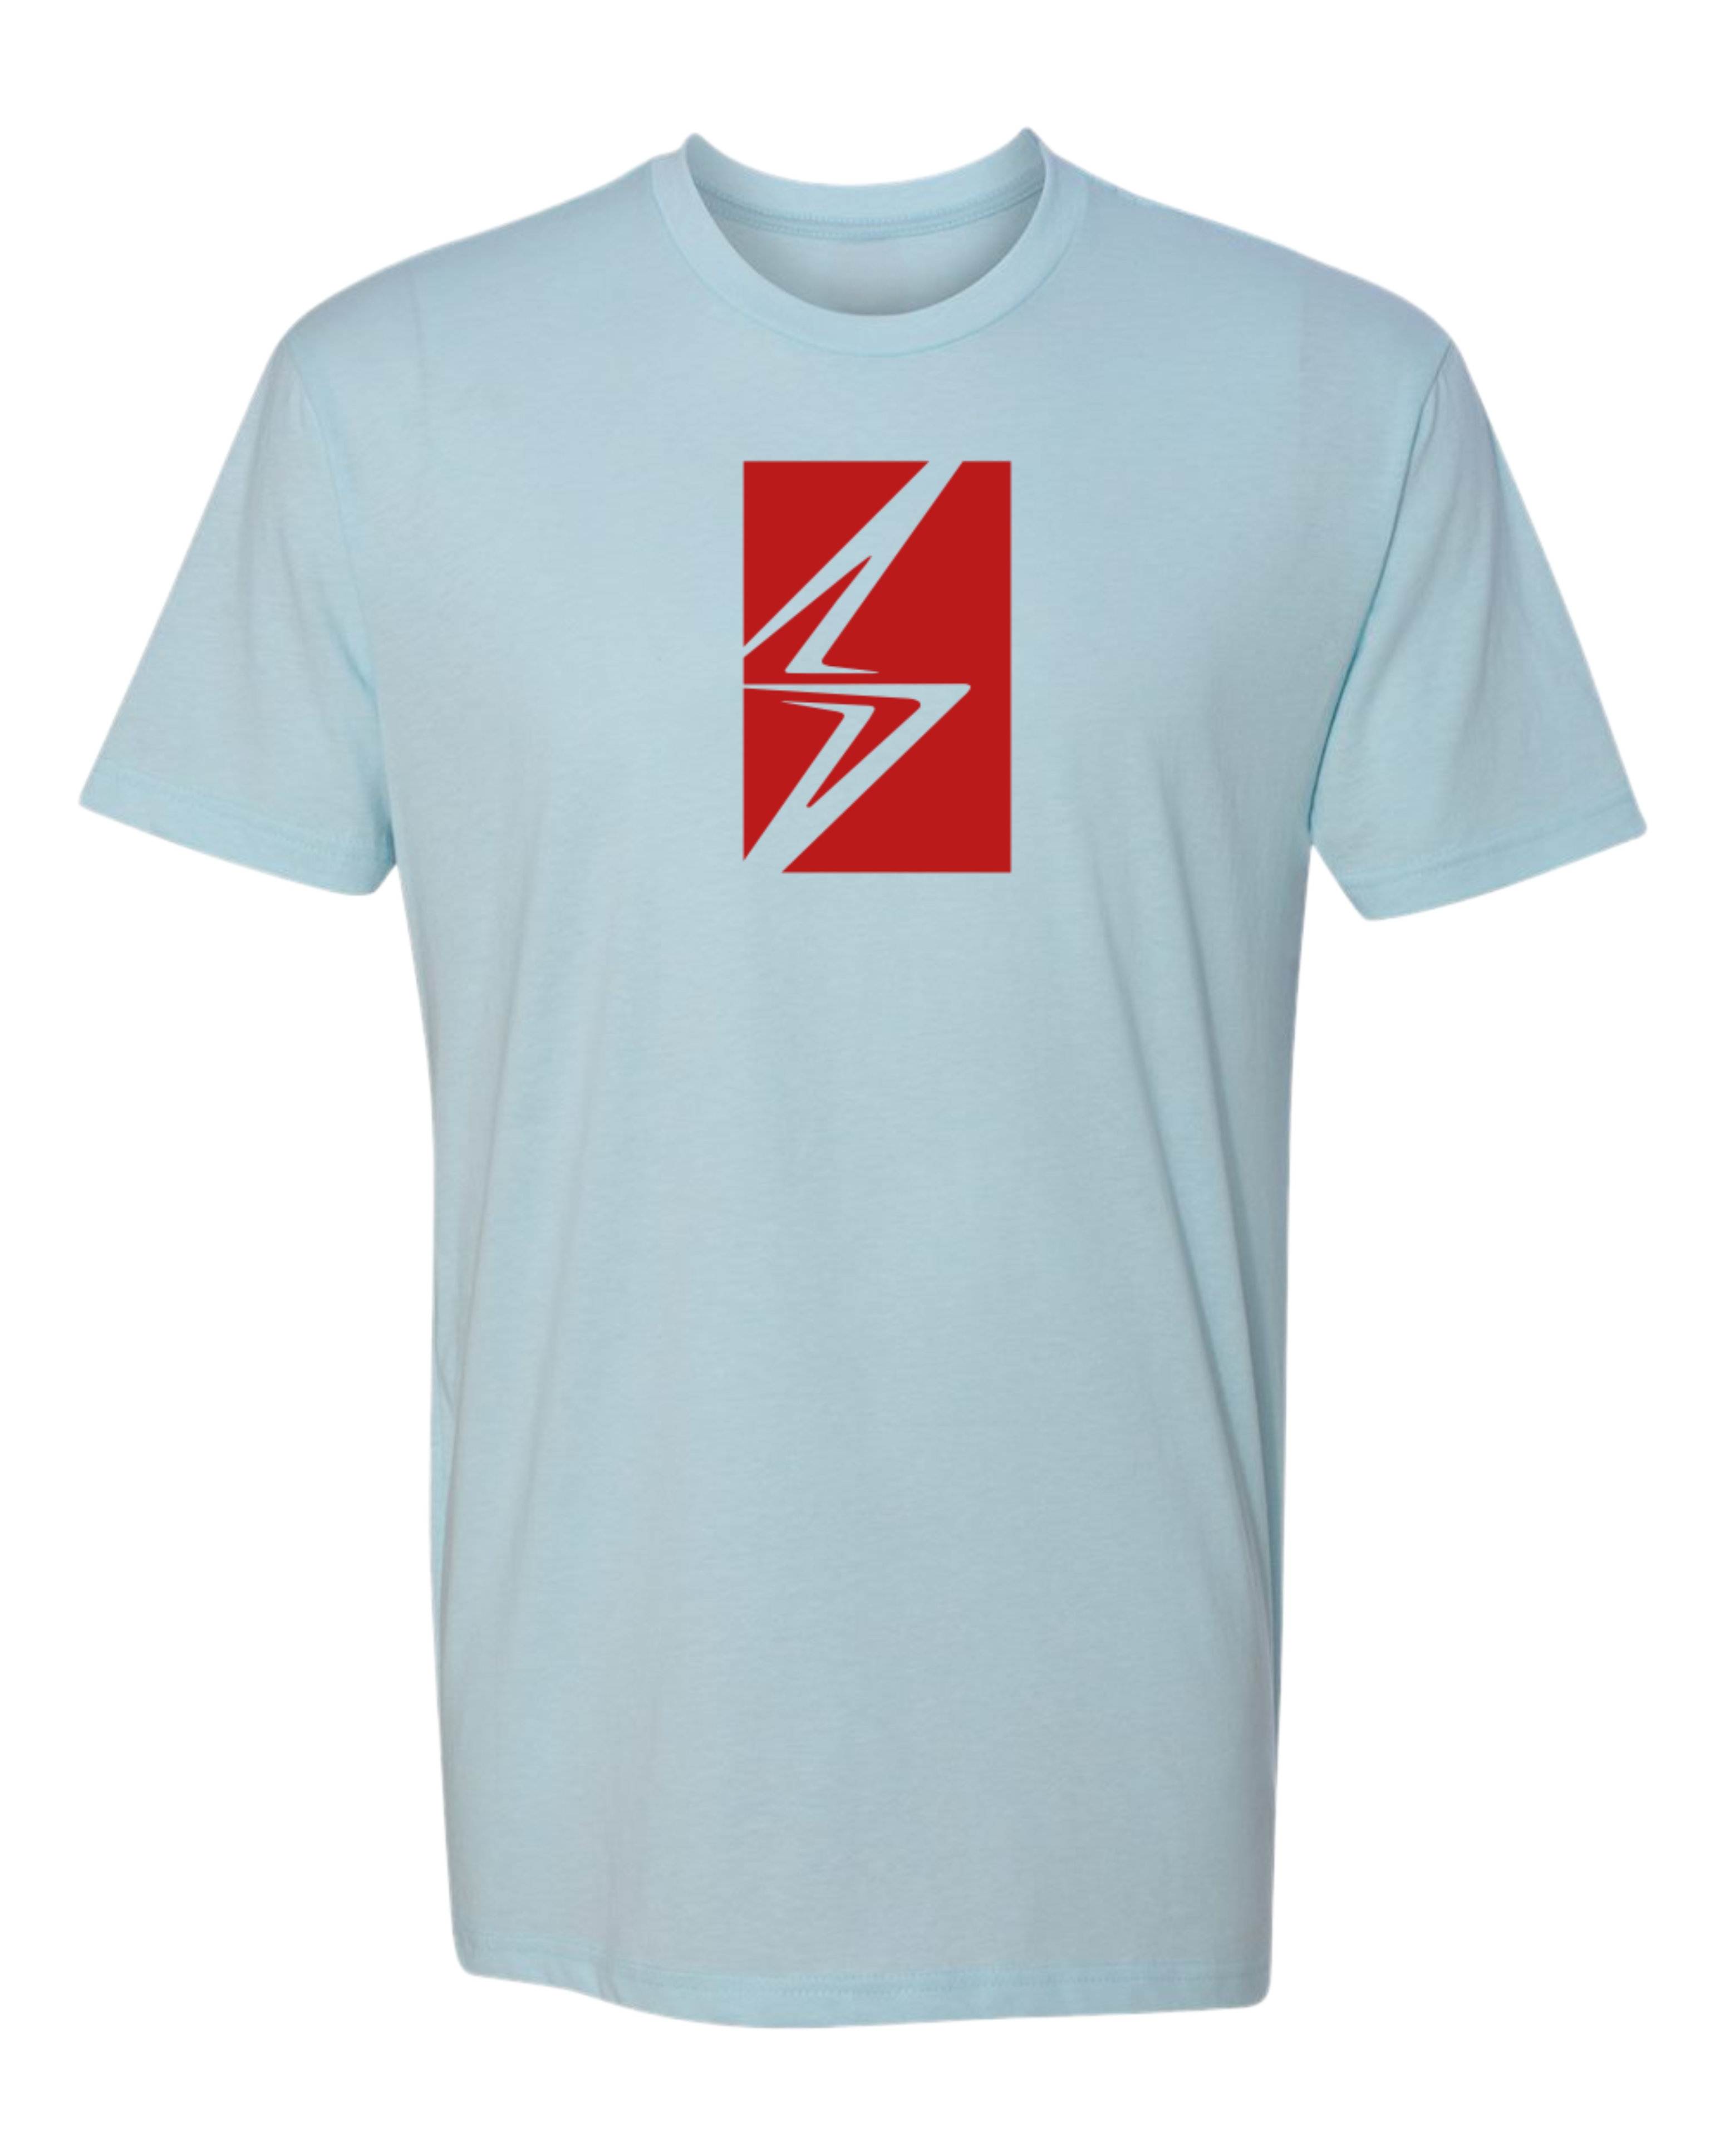 Shurtlive Bolt Box Tee-Ice Blue/Red